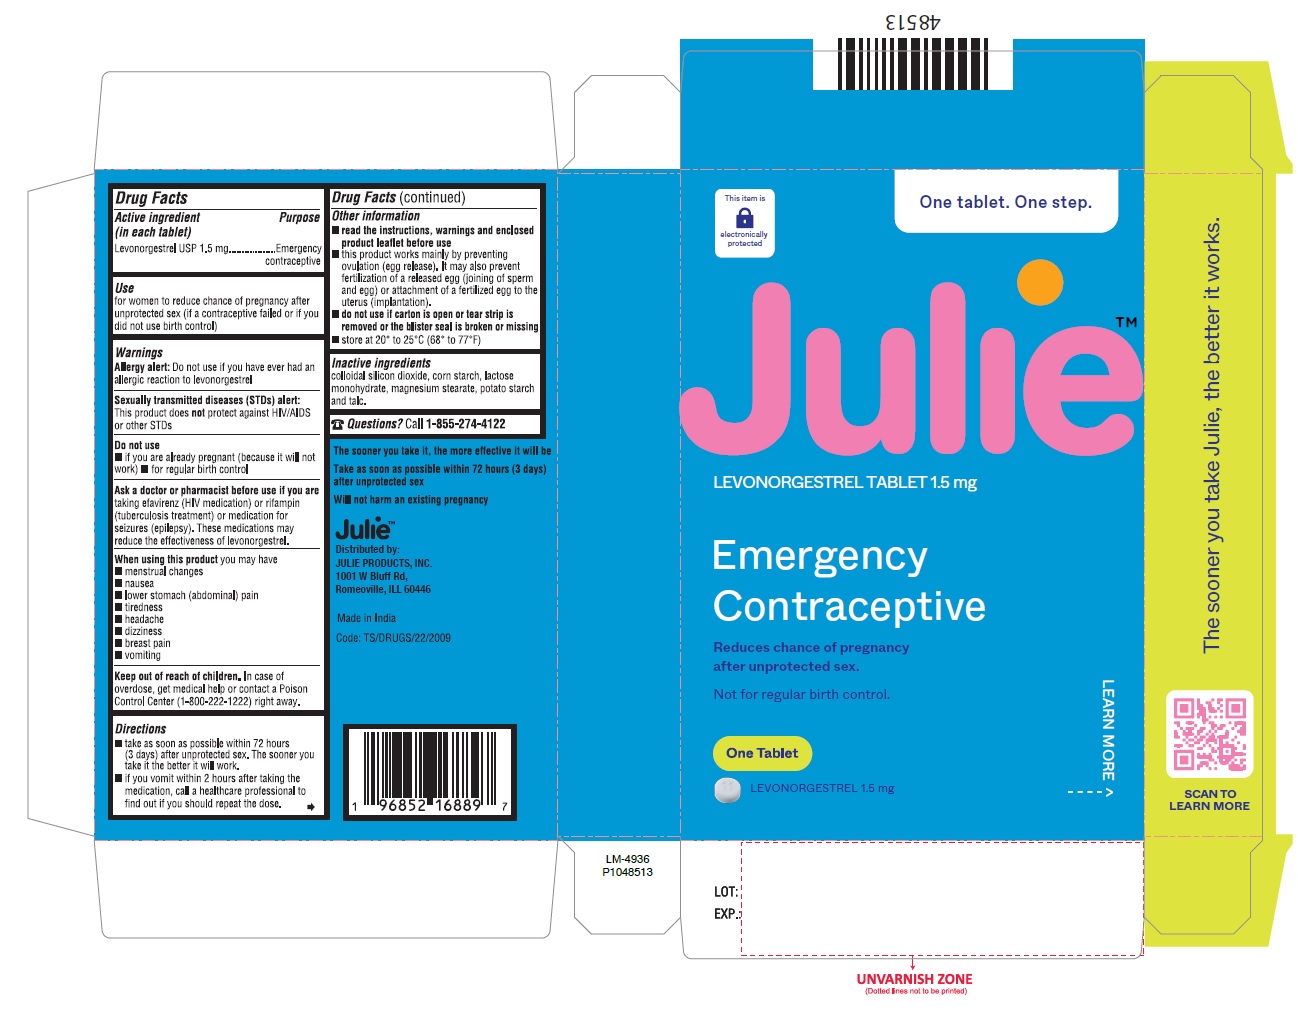 Plan B Emergency Contraceptive Tablet Contains 1 India